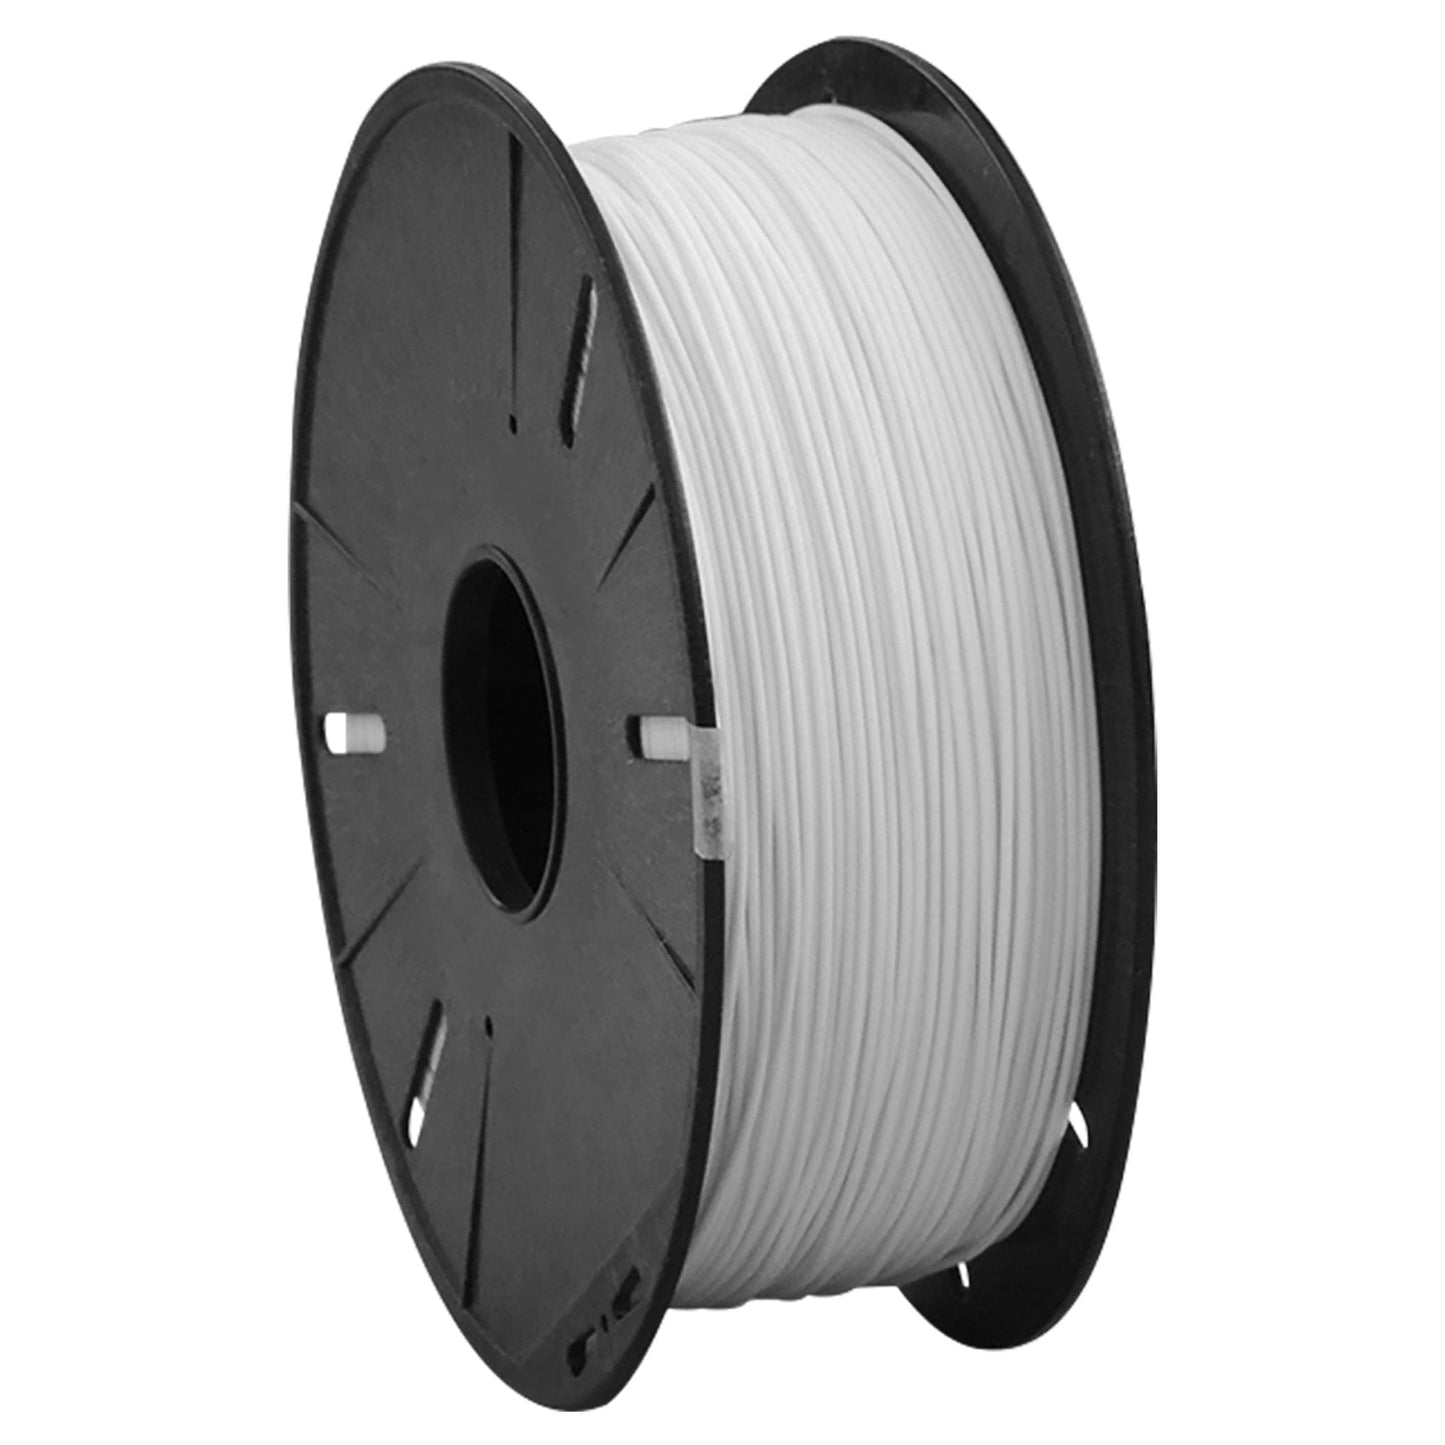 ABS White 1.75 mm filament